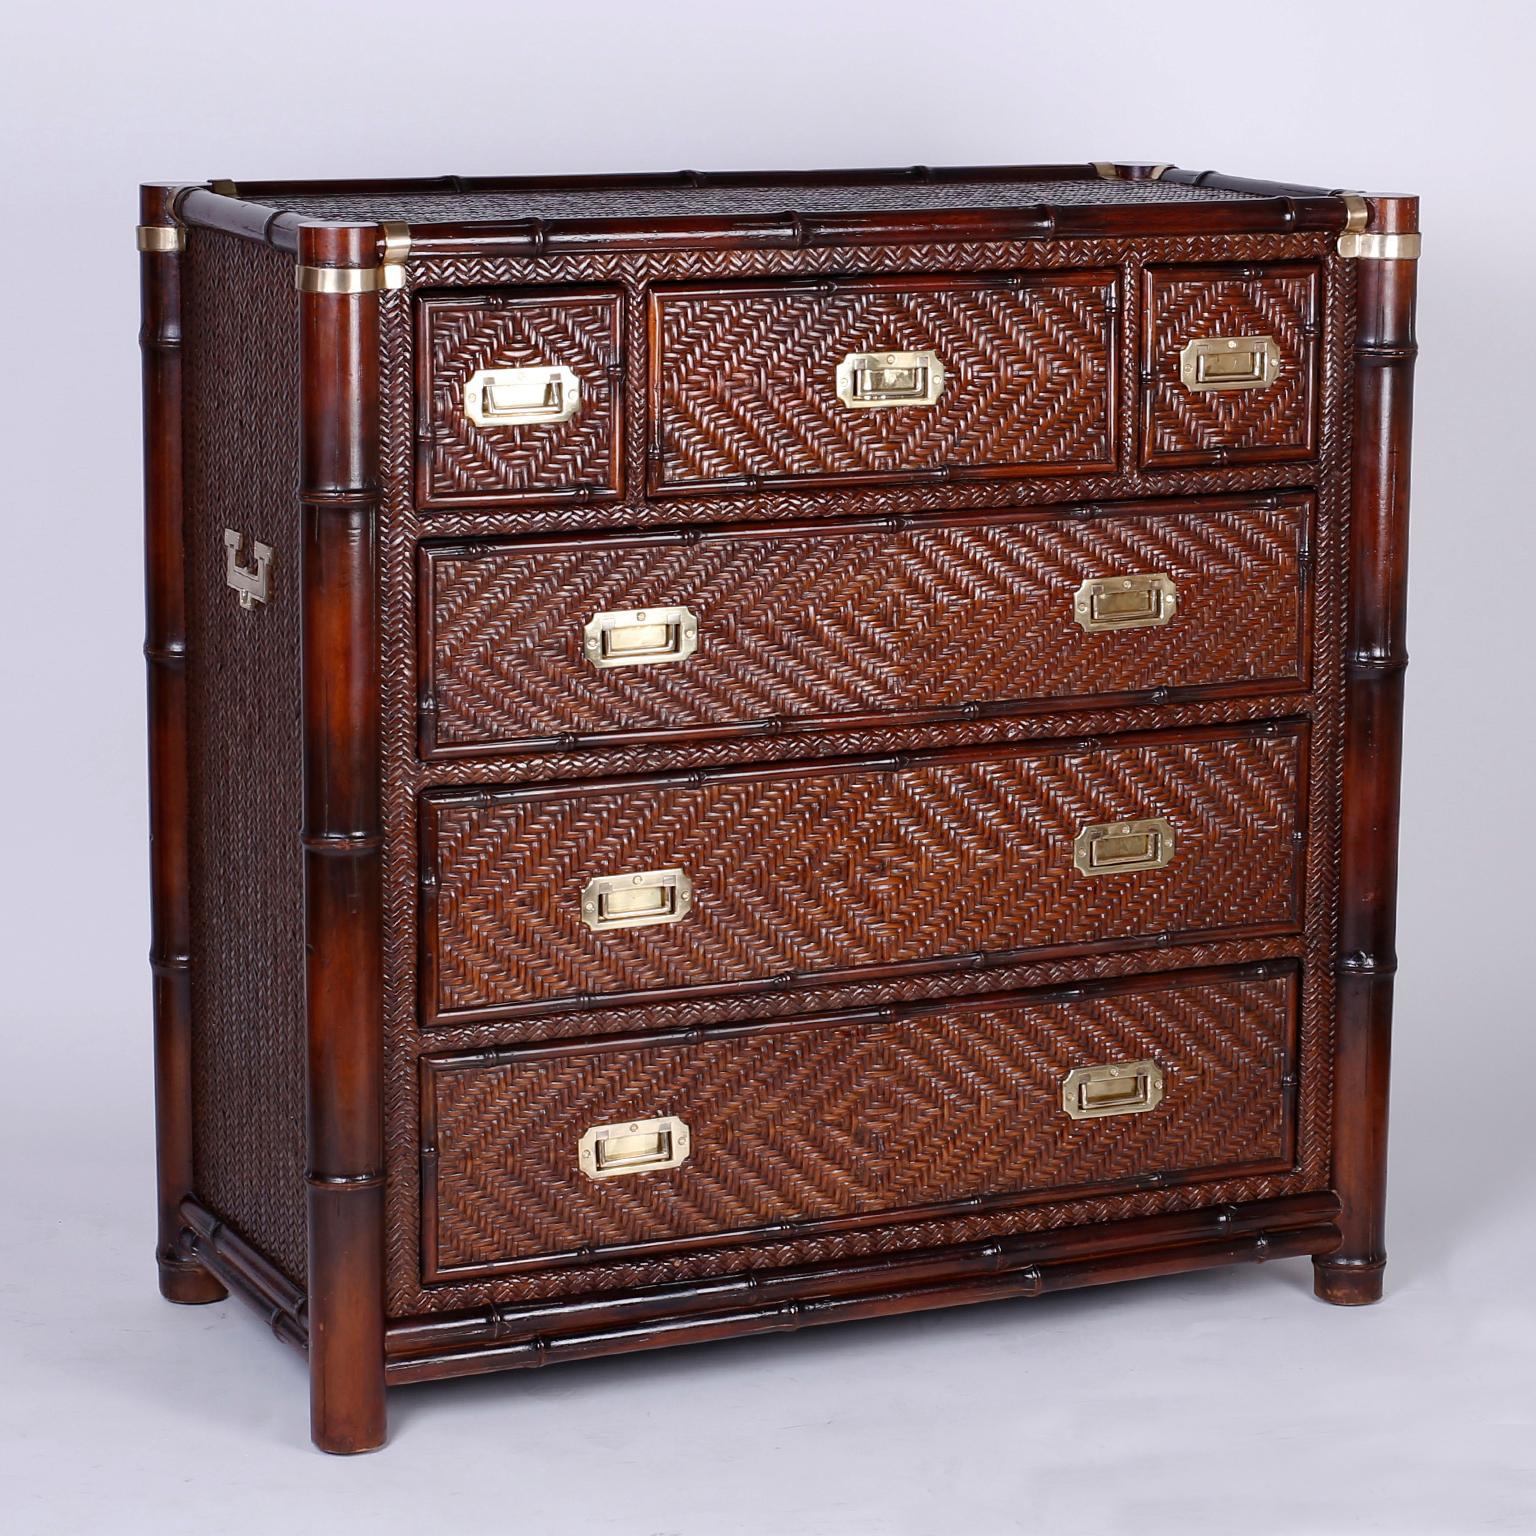 Handsome pair of British Colonial style chests of drawers with carved wood, faux bamboo frames over cases wrapped in herring bone rattan, while the inset brass hardware gives them a Campaign reference. The backs are finished and the chests are